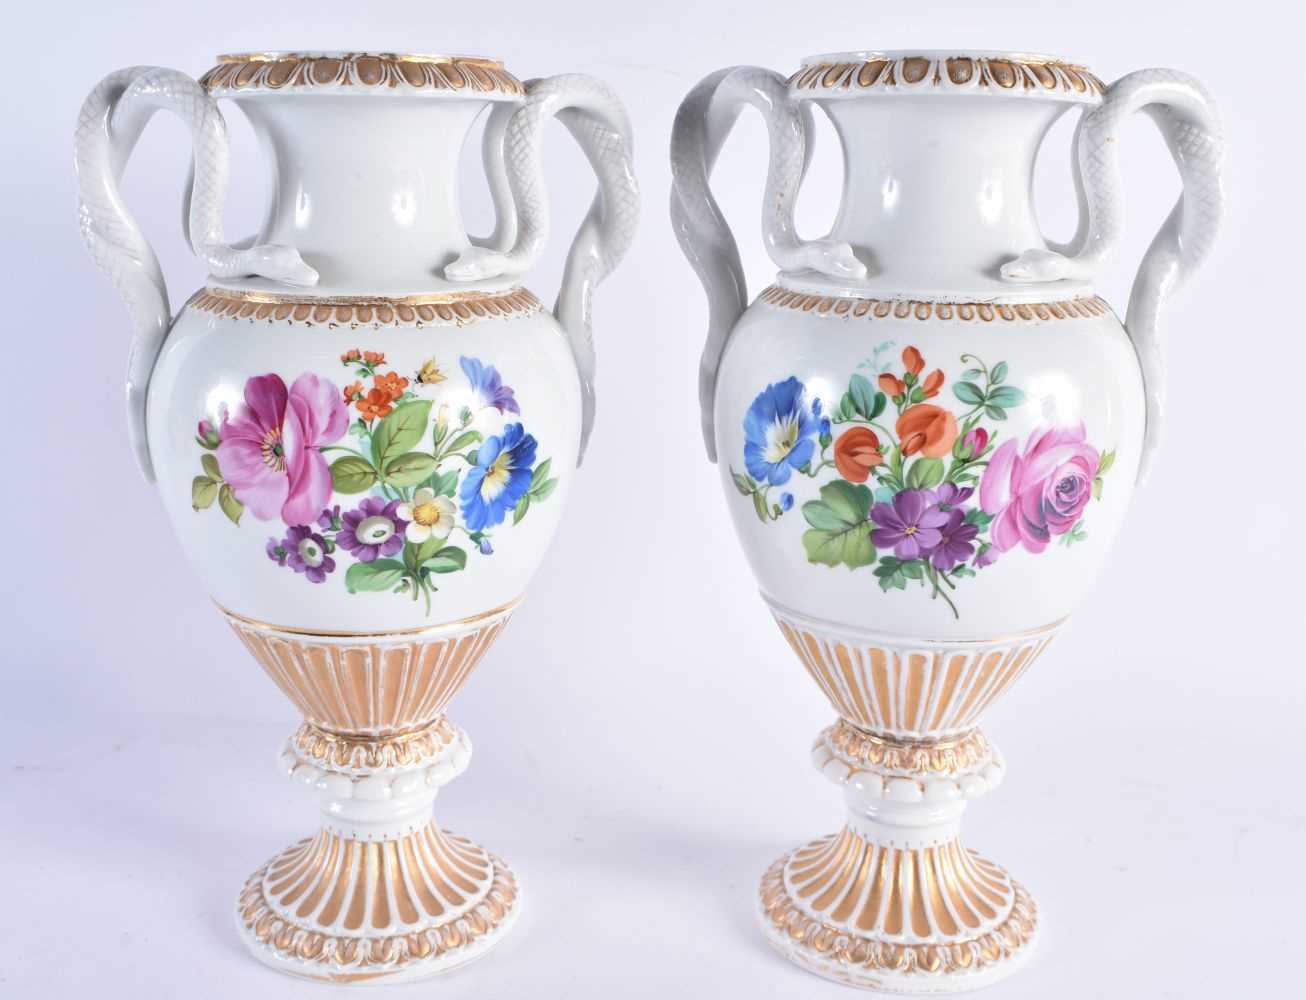 A LARGE PAIR OF EARLY 20TH CENTURY GERMAN TWIN HANDLED MEISSEN PORCELAIN VASES painted with floral - Image 3 of 9